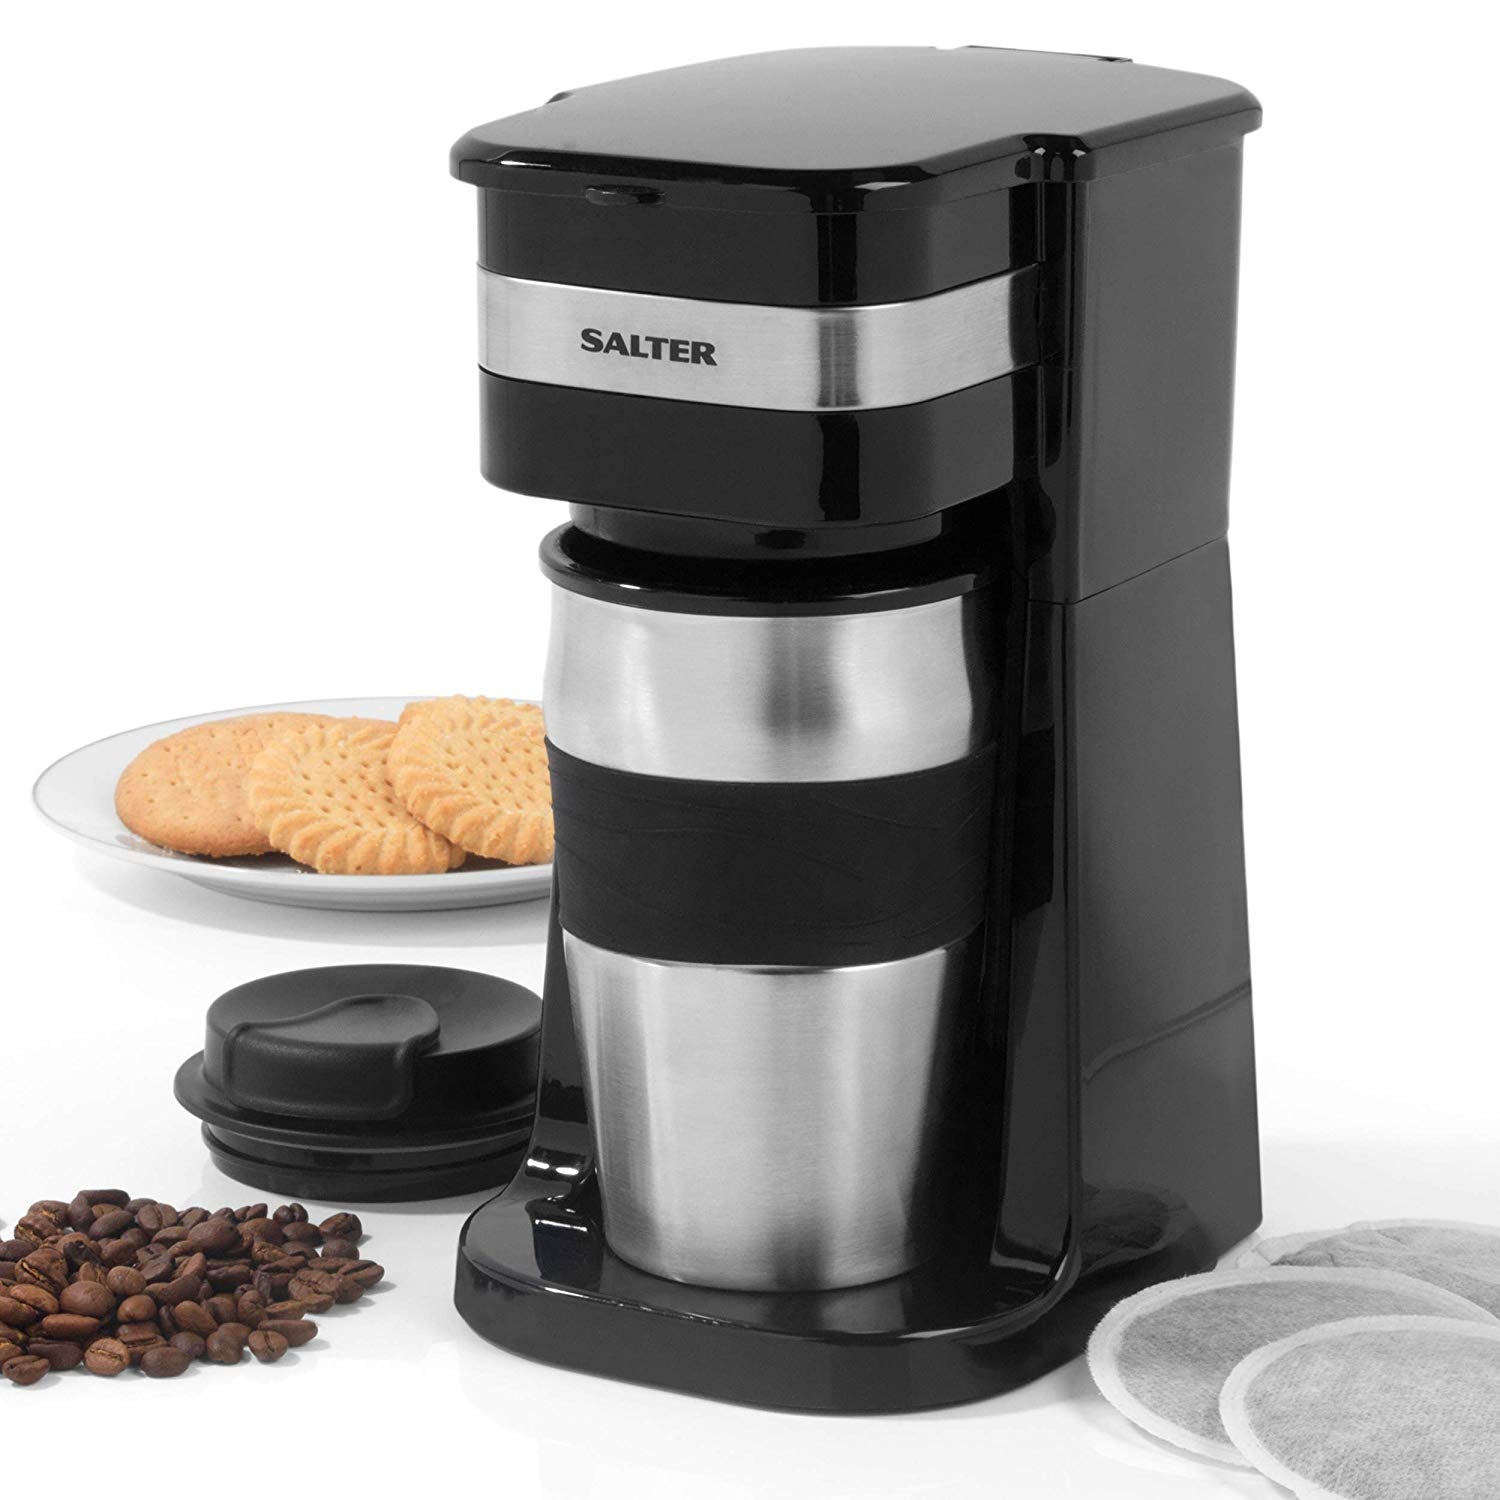 Salter Coffee Maker To Go